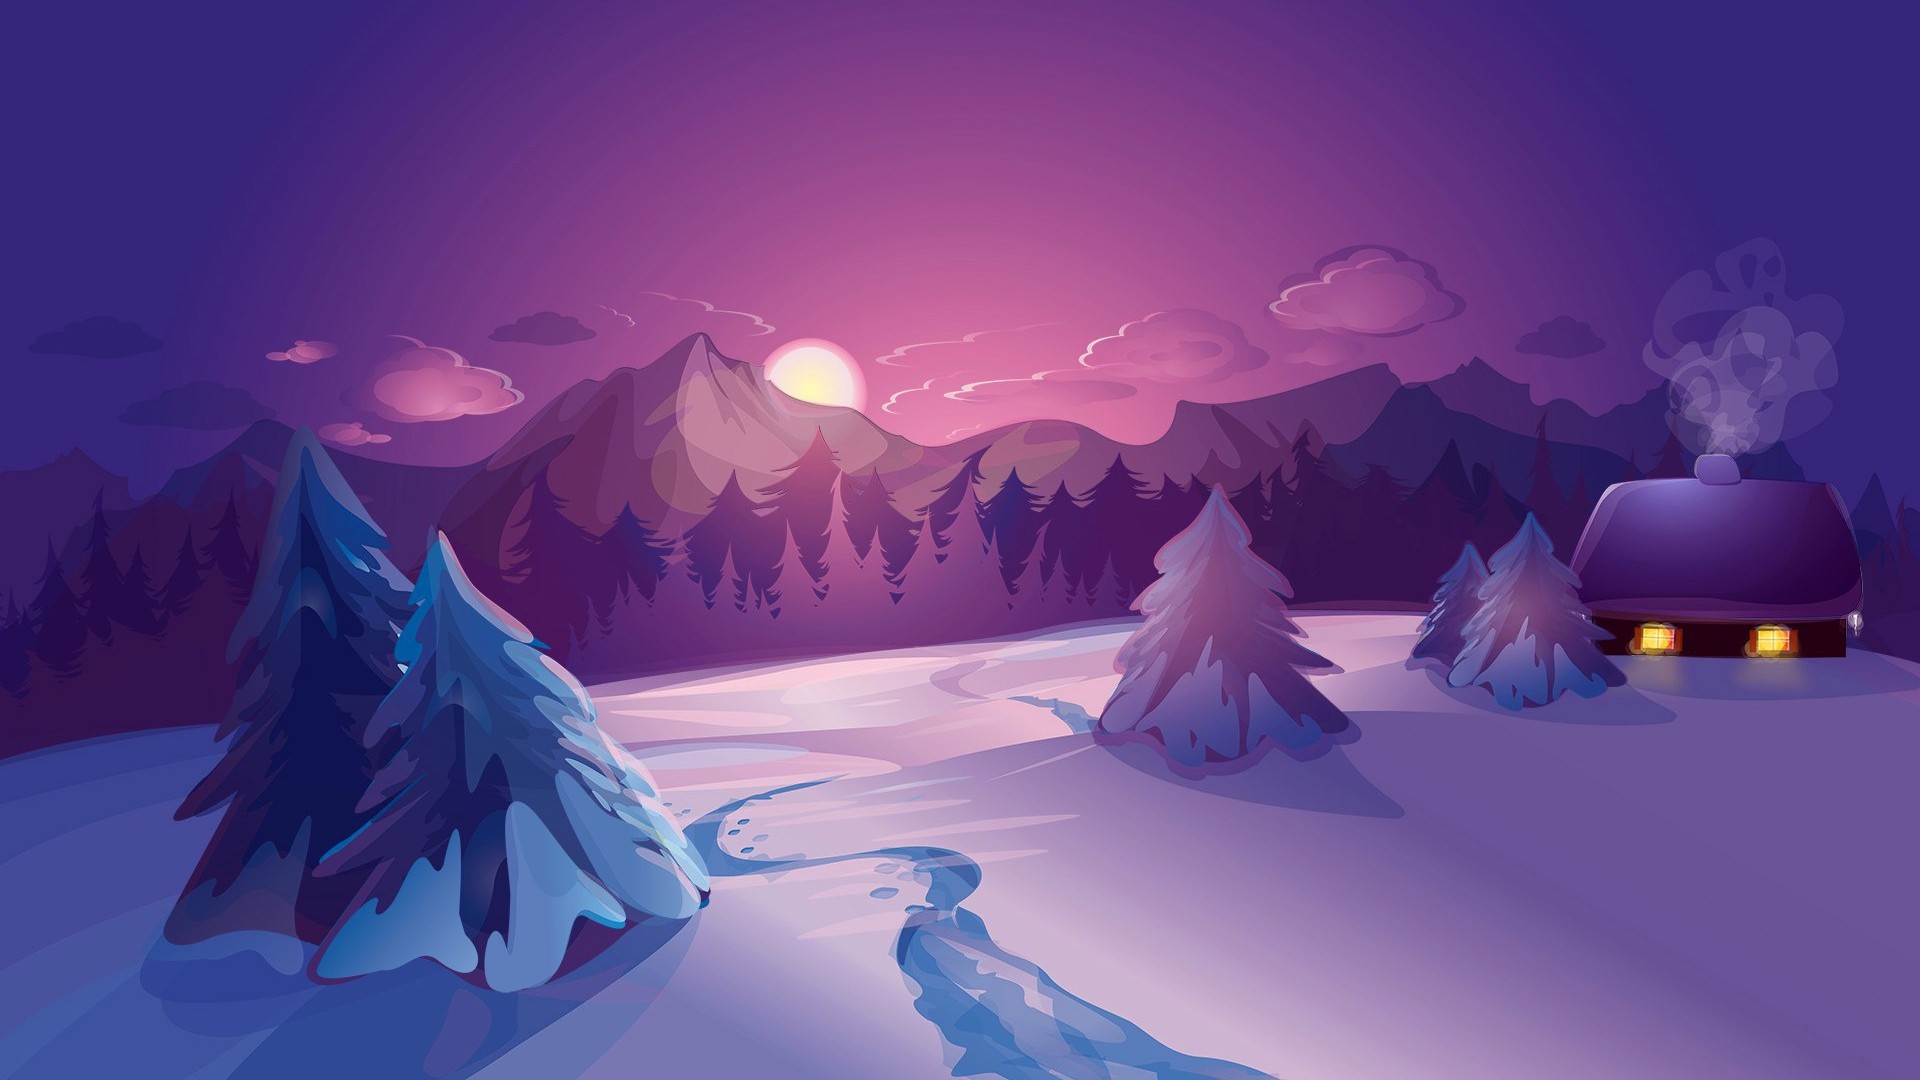 General 1920x1080 nature landscape digital art mountains clouds winter house snow sunset forest calm pink